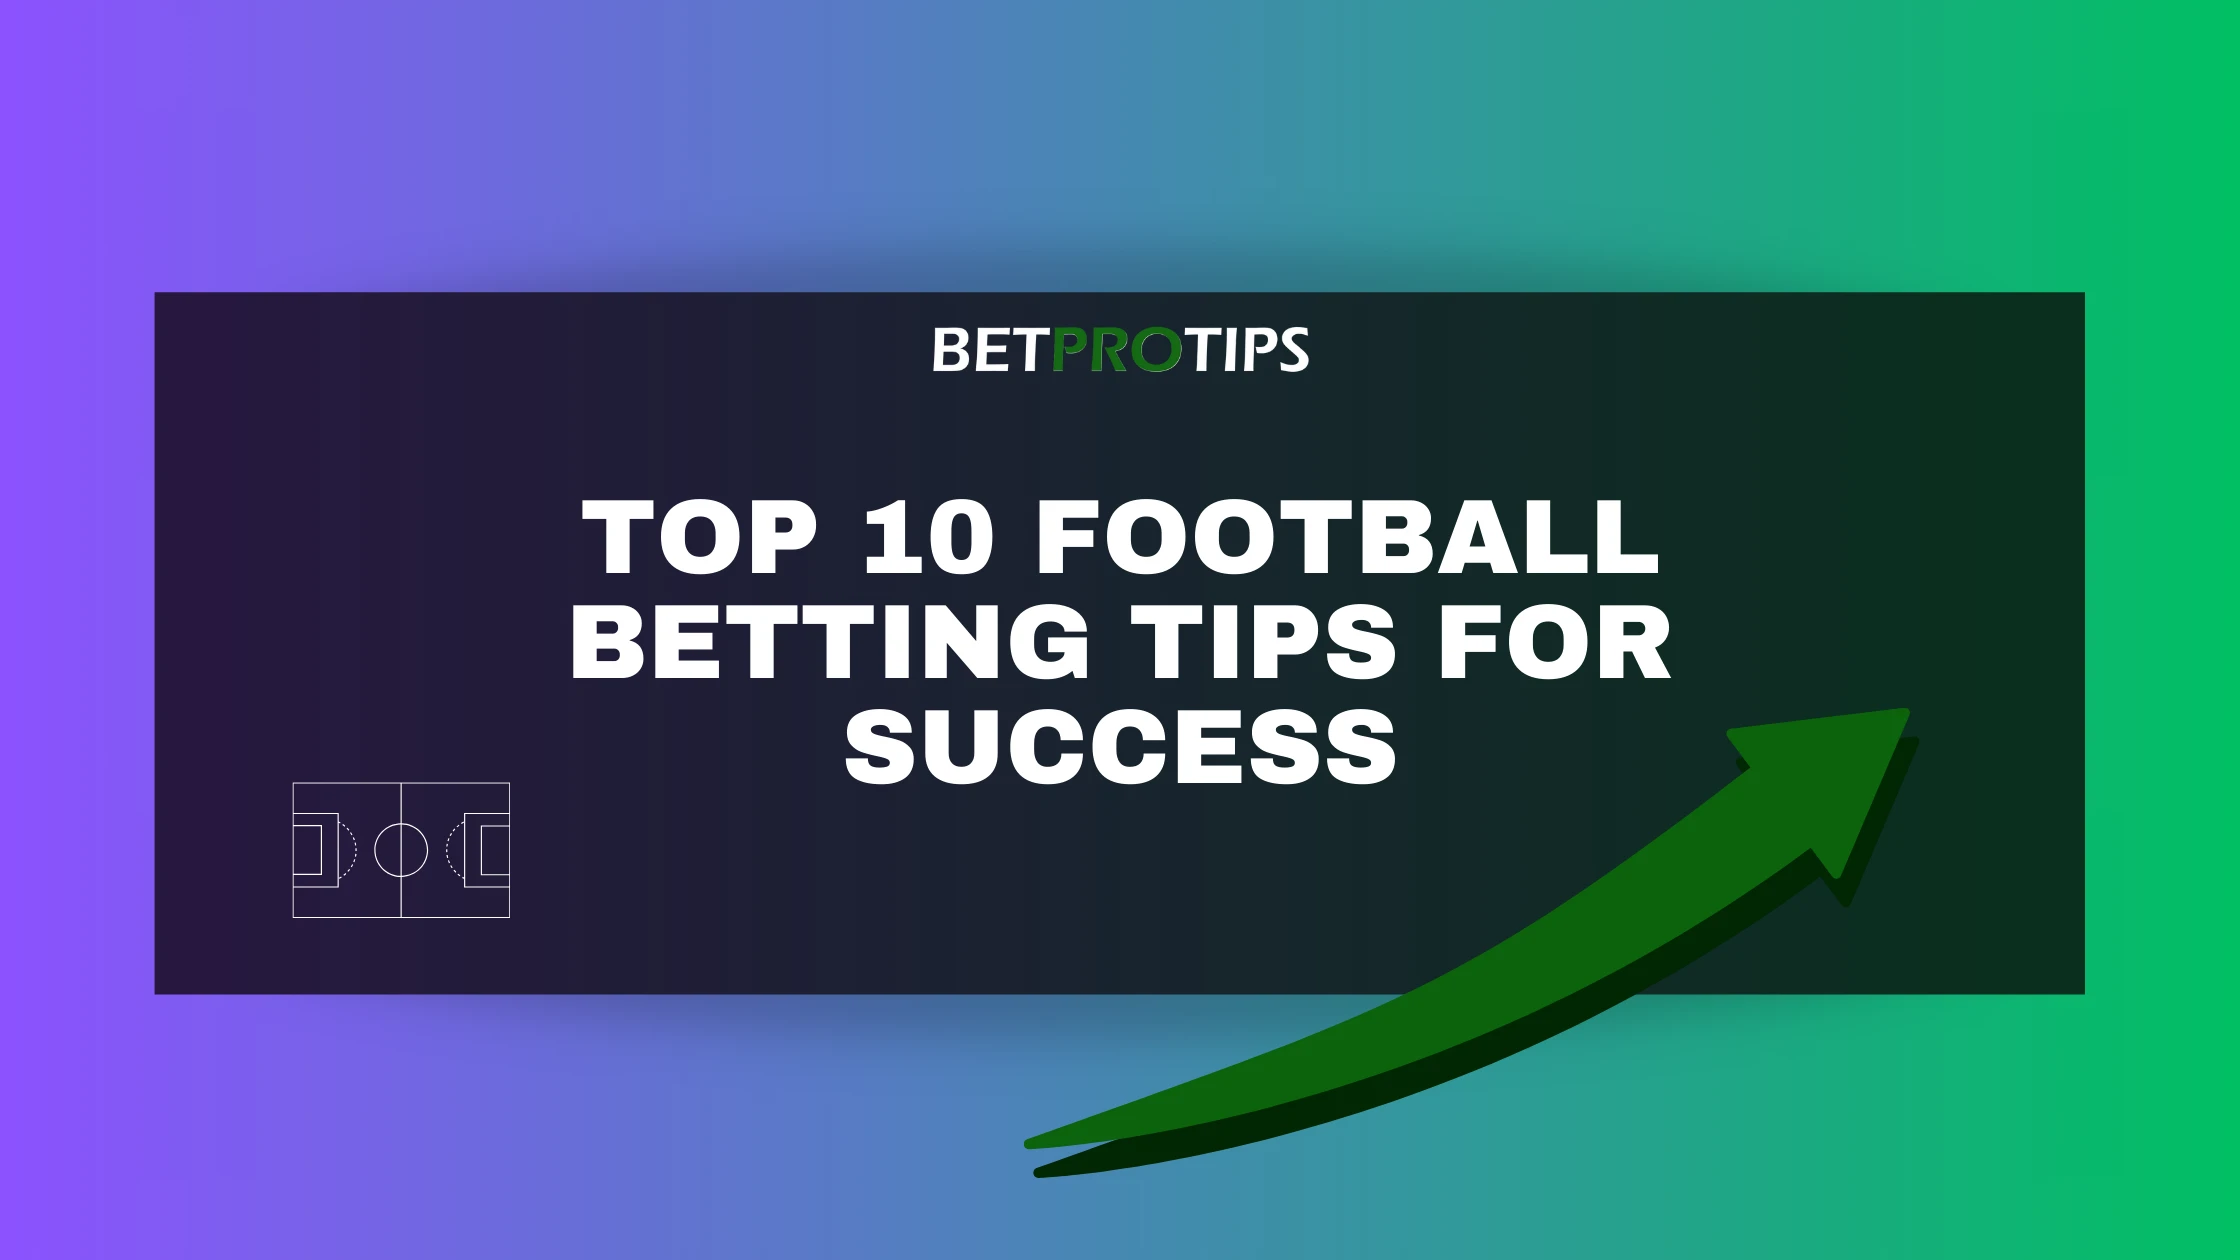 BTTS Tips: Free Tips for Today & and Upcoming Fixtures